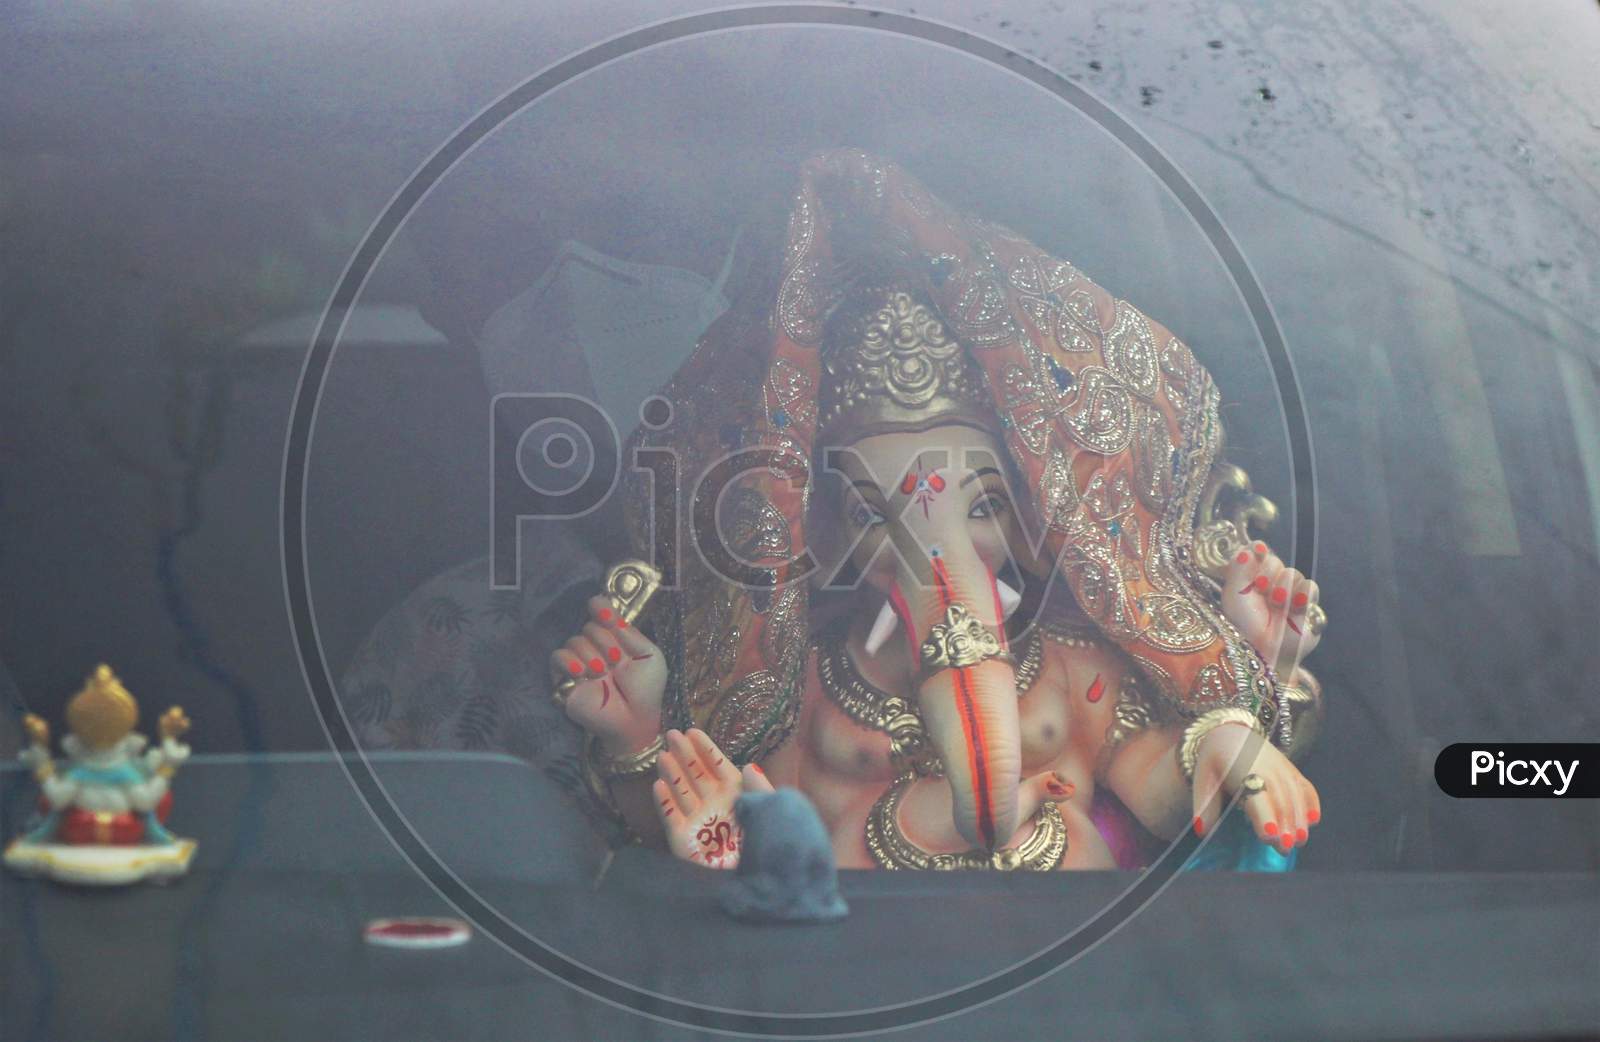 A devotee carries home an idol of elephant-headed Hindu god Ganesha for worship during Ganesh Chaturthi festival celebrations in Mumbai, India, on August 22, 2020.